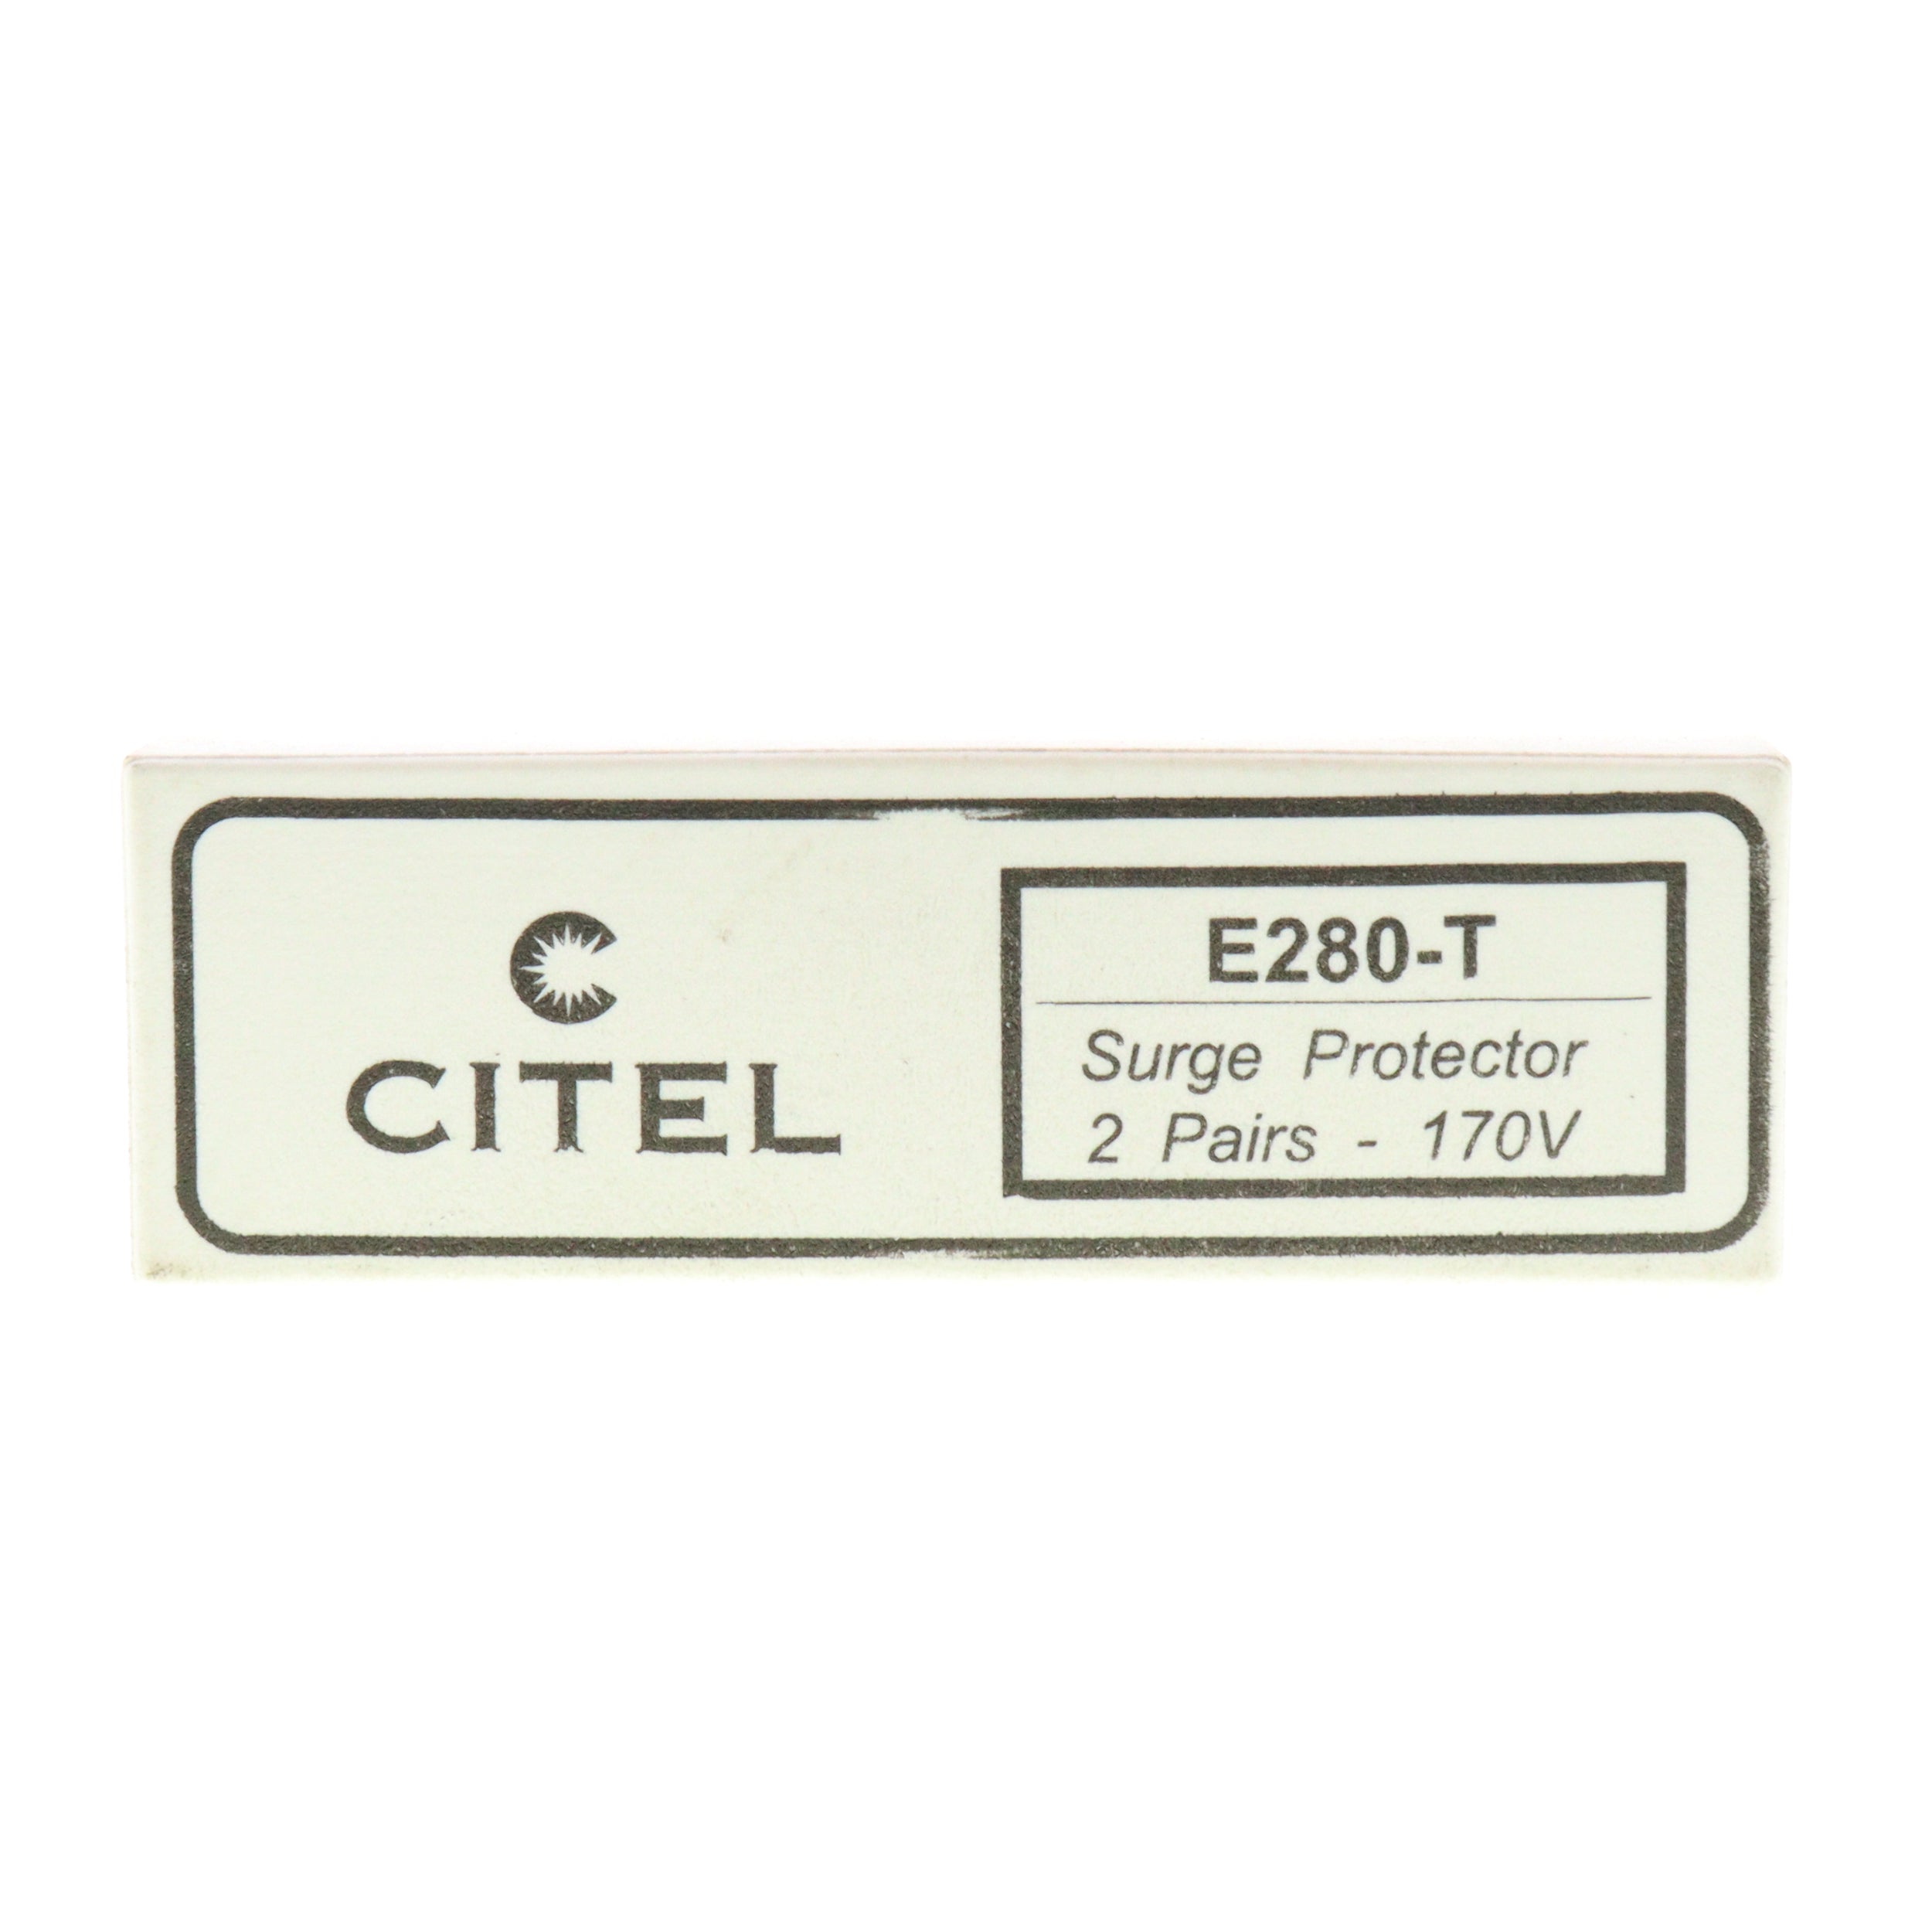 Citel, CITEL E280-T ISOLATED LOOP SURGE PROTECTOR SPD, PIN MOUNT, 170V